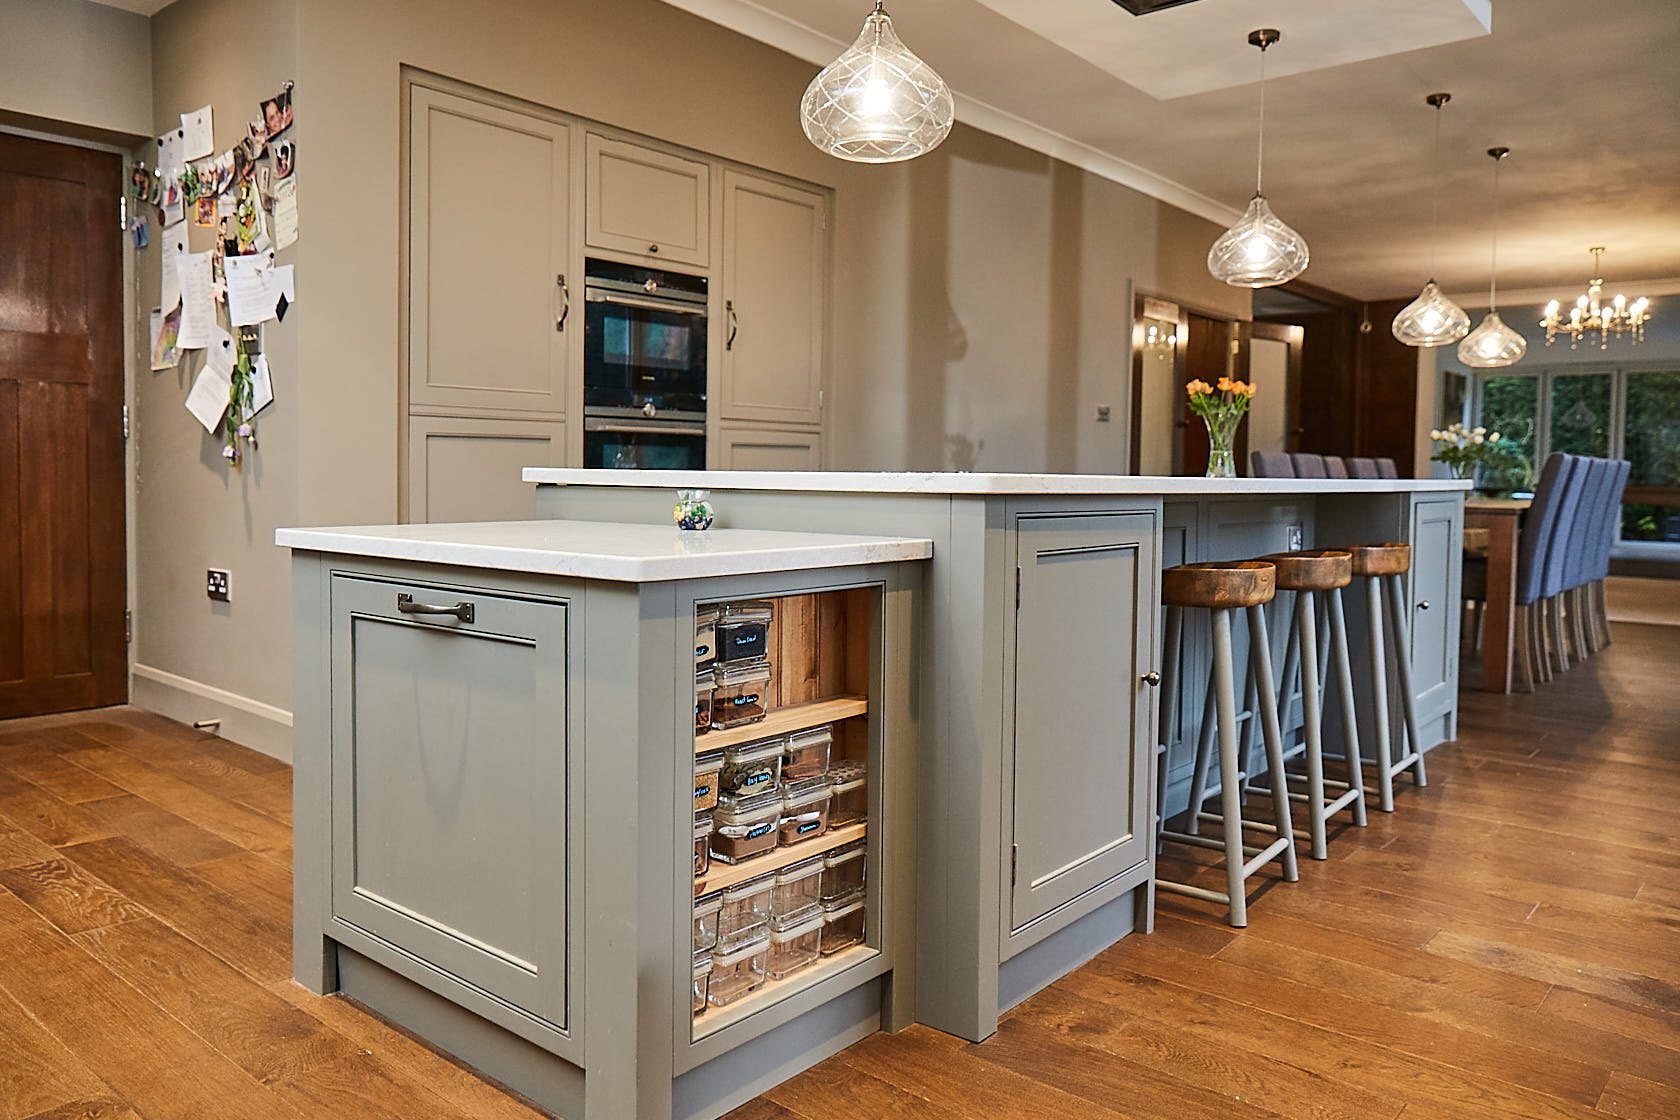 Bespoke kitchen unit with open spice rack on the side